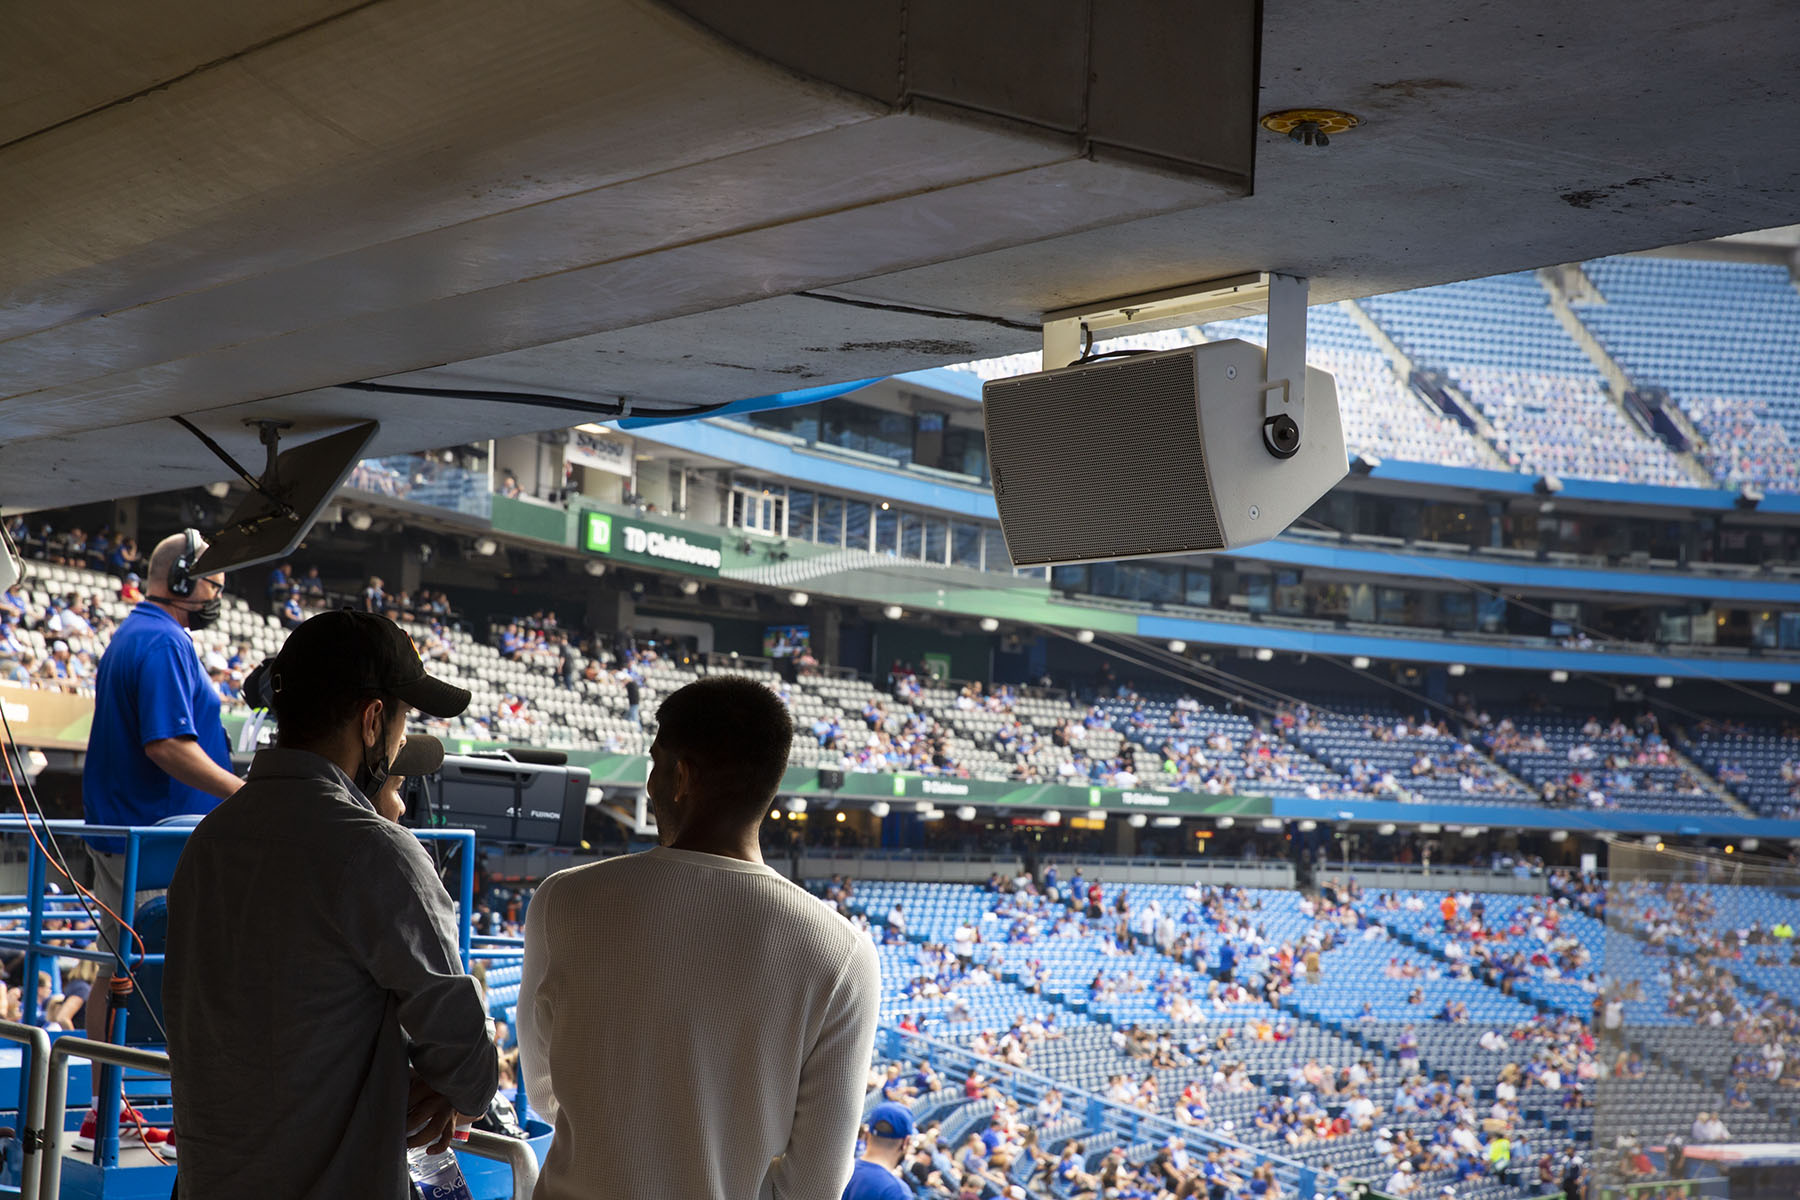 state-of-the-art QX series PA from Eastern Acoustic Works (EAW®) at Rogers Centre